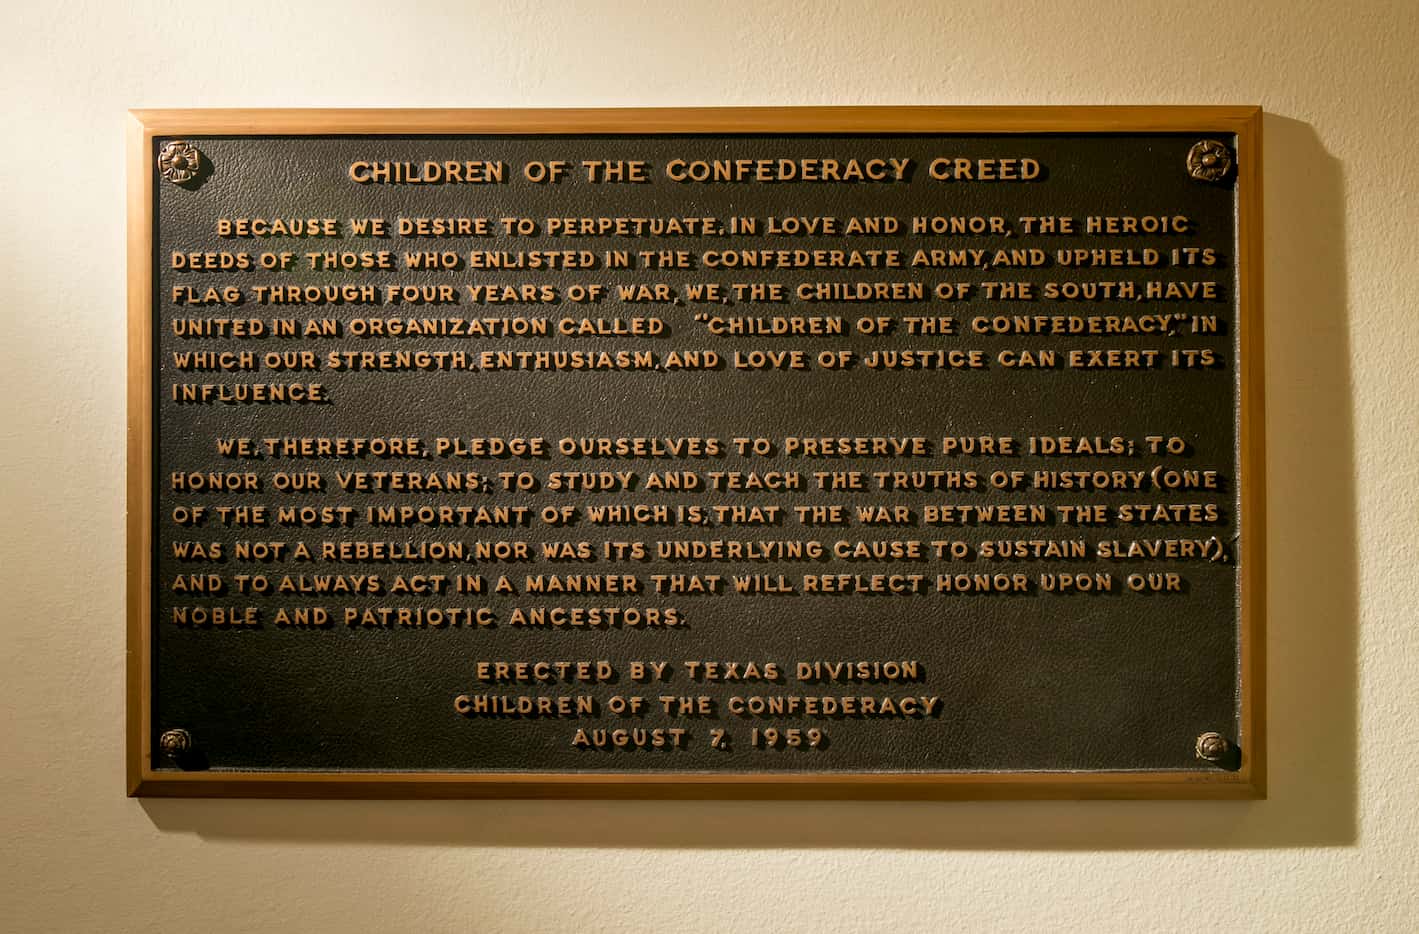 The "Children of the Confederacy Creed" plaque at the Capitol on Thursday August 17, 2017.